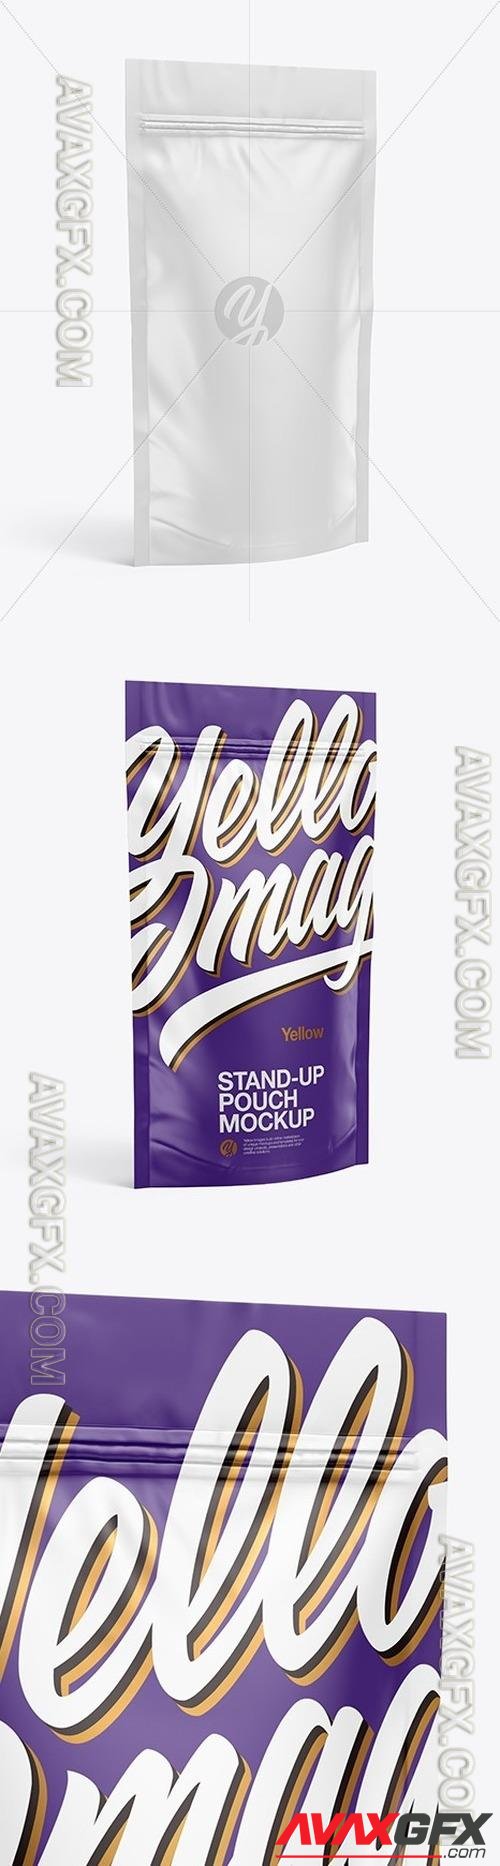 Matte Stand-Up Pouch Mockup 49984 TIF